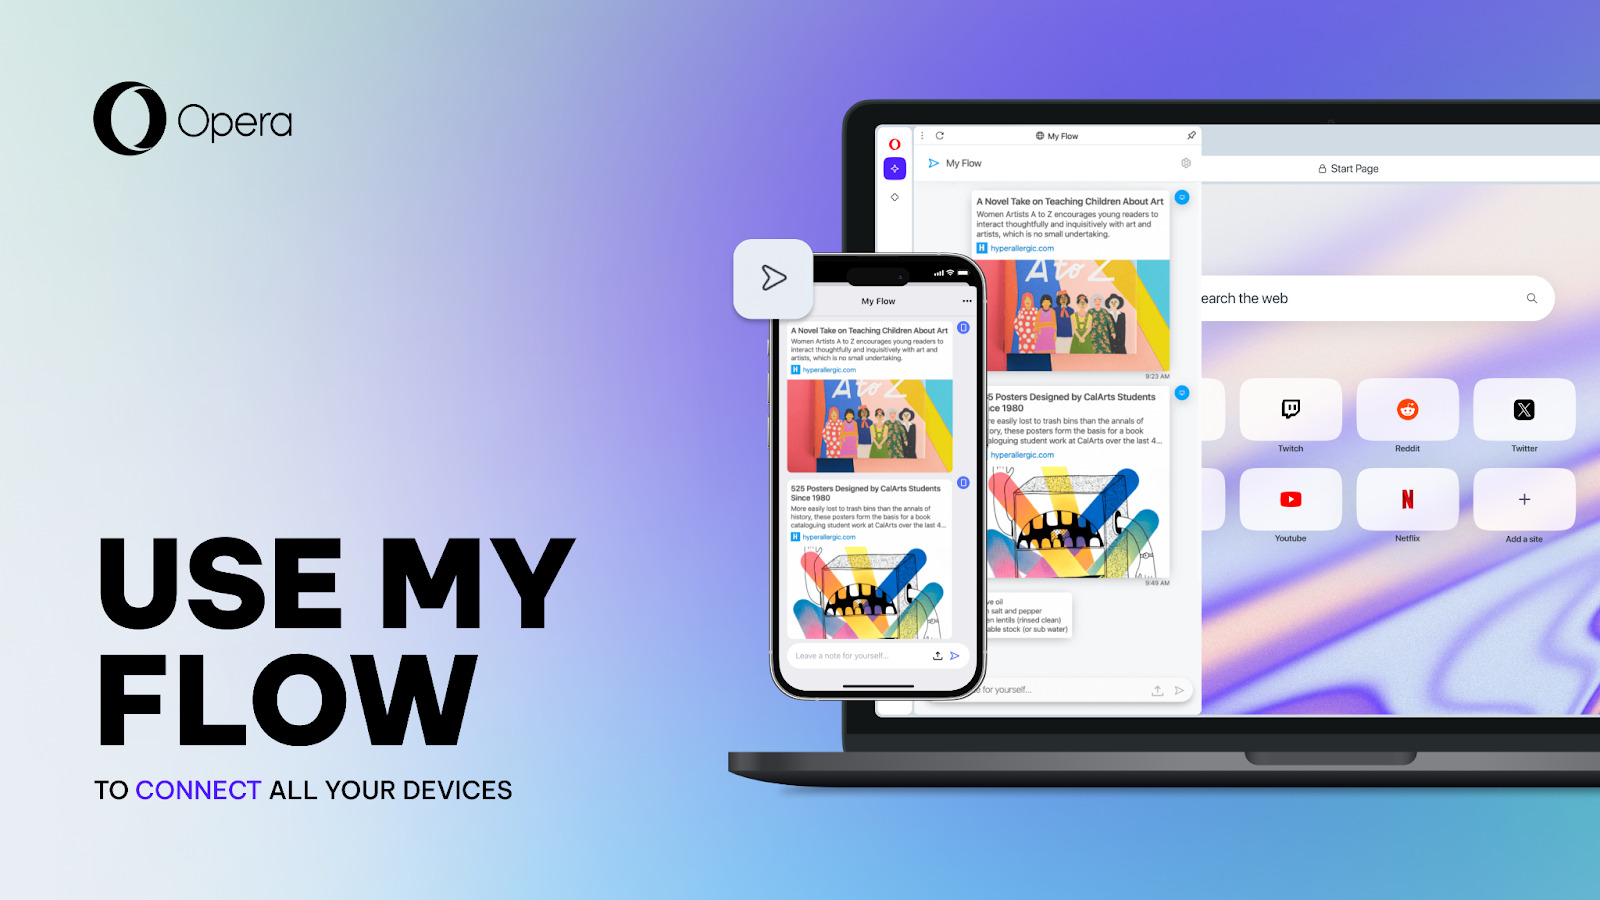 A laptop and a phone show Opera's innovative My Flow feature, allowing you to save files and documents across devices.